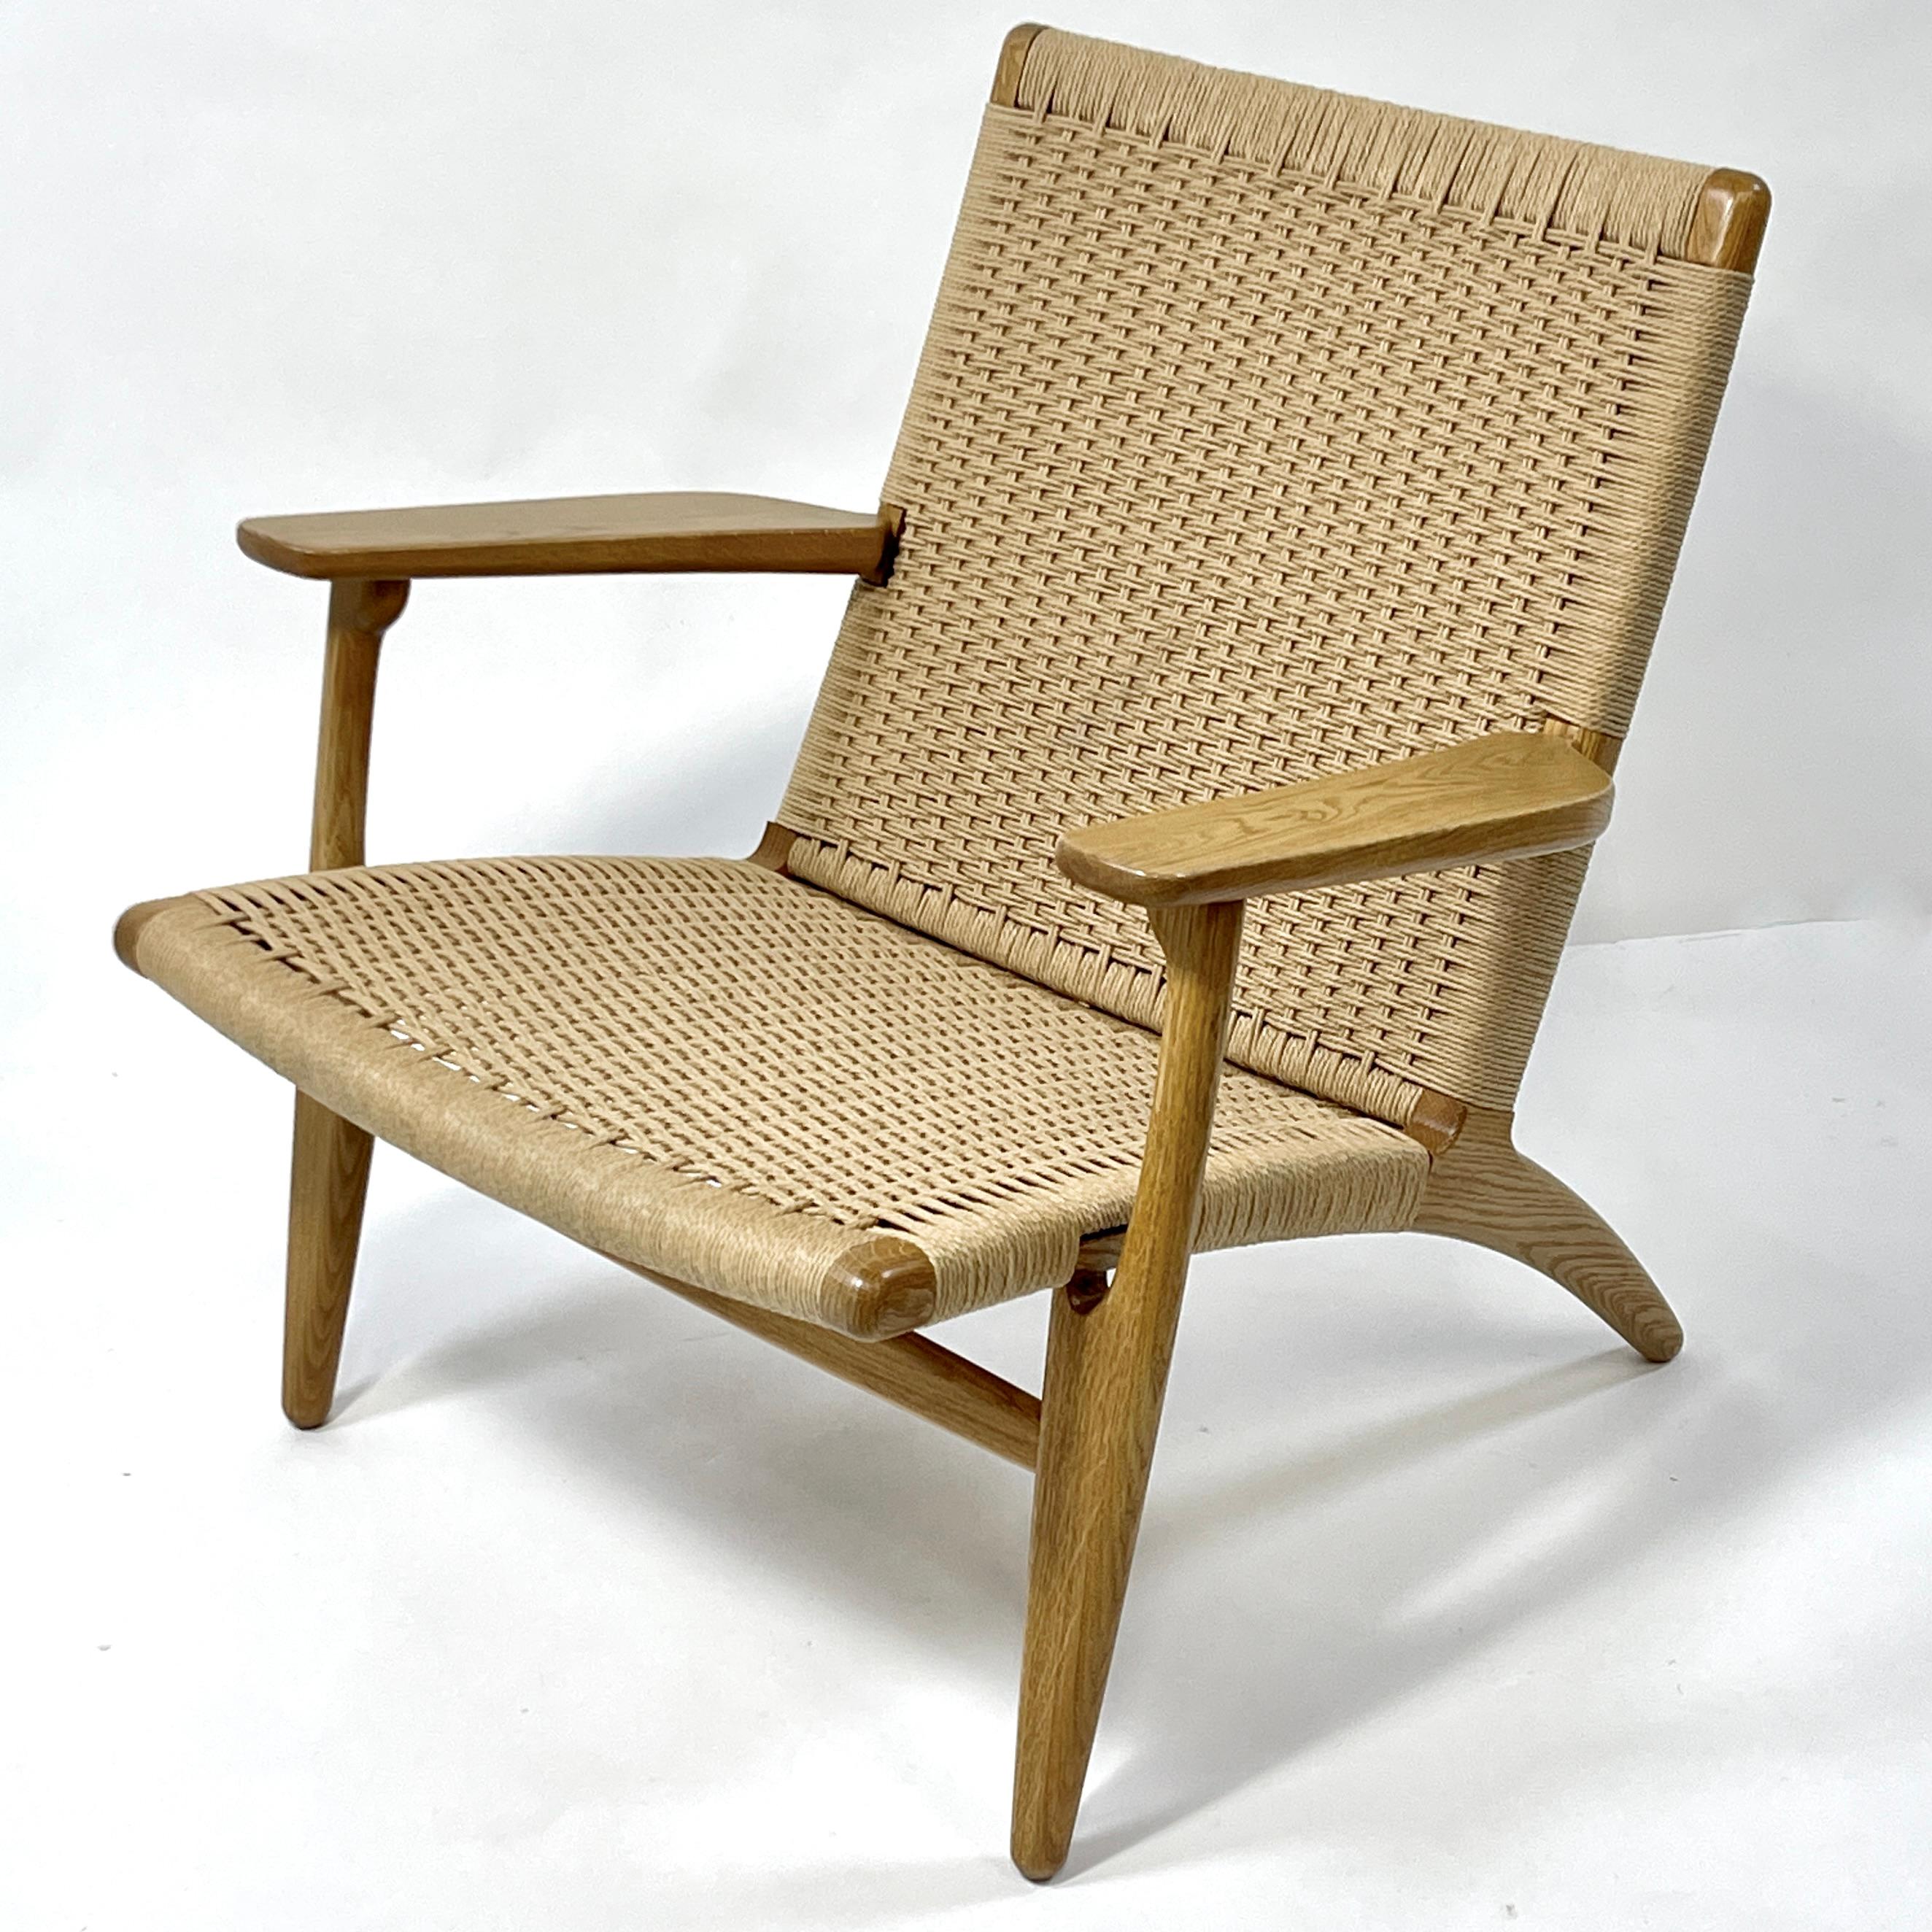 This is an oiled oak and papercord Hans Wegner Model CH25 Lounge chair. Excellent and comfortable. Solid handmake construction. Still being produced and distributed by Carl Hansen and Sons. This is a more recent production from Carl Hansen and Sons.